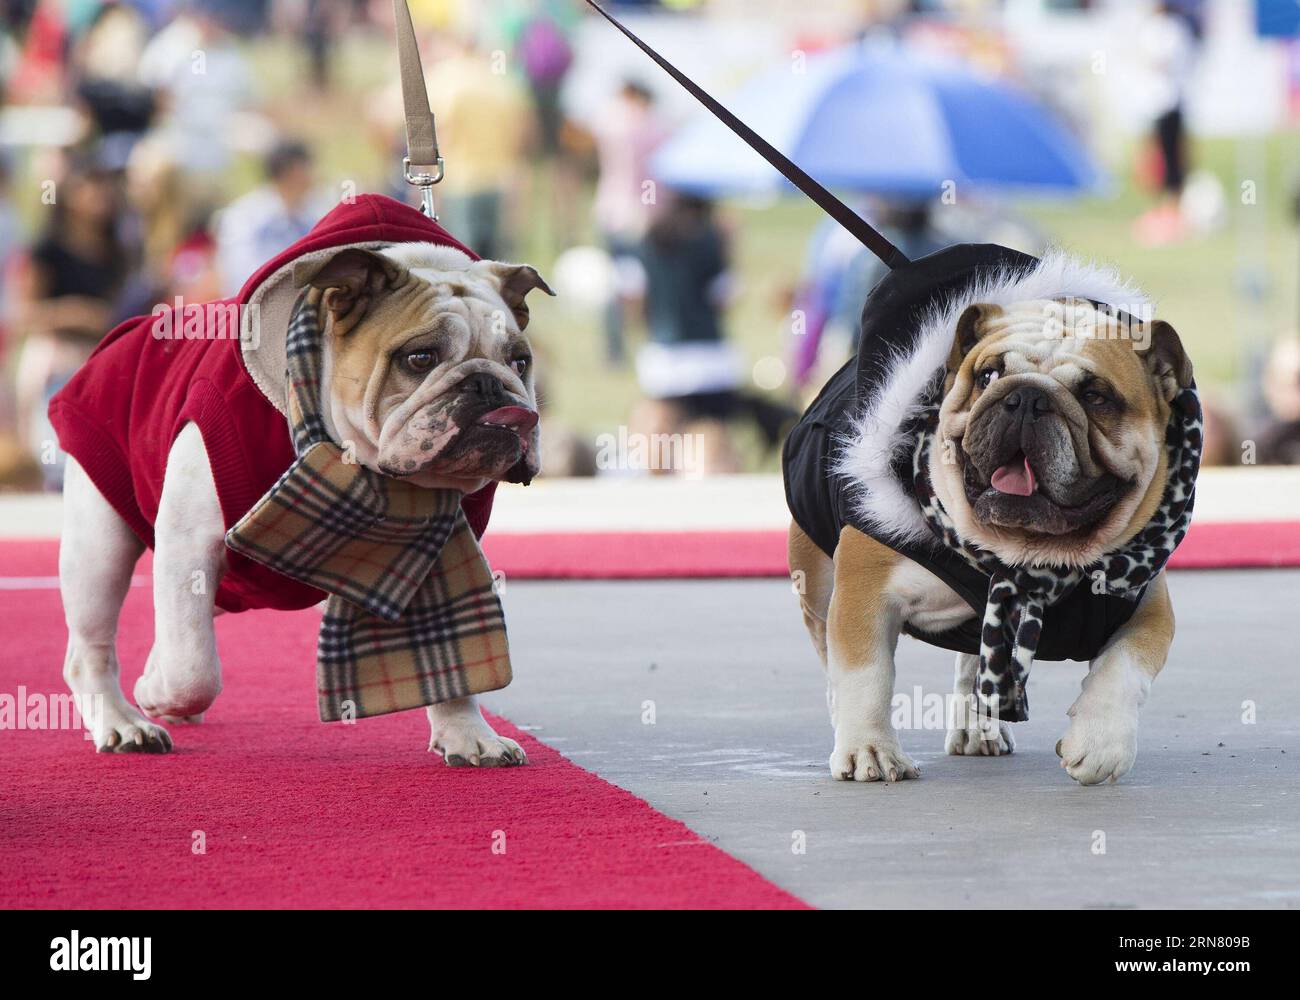 (150927) -- TORONTO, Sept. 27, 2015 -- Two dressed up pet dogs are seen on stage during the fashion show event of the 2015 Woofstock at Woodbine Park in Toronto, Canada, Sept. 27, 2015. Woofstock is the largest outdoor festival for dogs in North America. ) CANADA-TORONTO-WOOFSTOCK-PET DOG-FASHION SHOW ZouxZheng PUBLICATIONxNOTxINxCHN   Toronto Sept 27 2015 Two Dressed up Pet Dogs are Lakes ON Stage during The Fashion Show Event of The 2015 Woofstock AT Woodbine Park in Toronto Canada Sept 27 2015 Woofstock IS The Largest Outdoor Festival for Dogs in North America Canada Toronto Woofstock Pet D Stock Photo